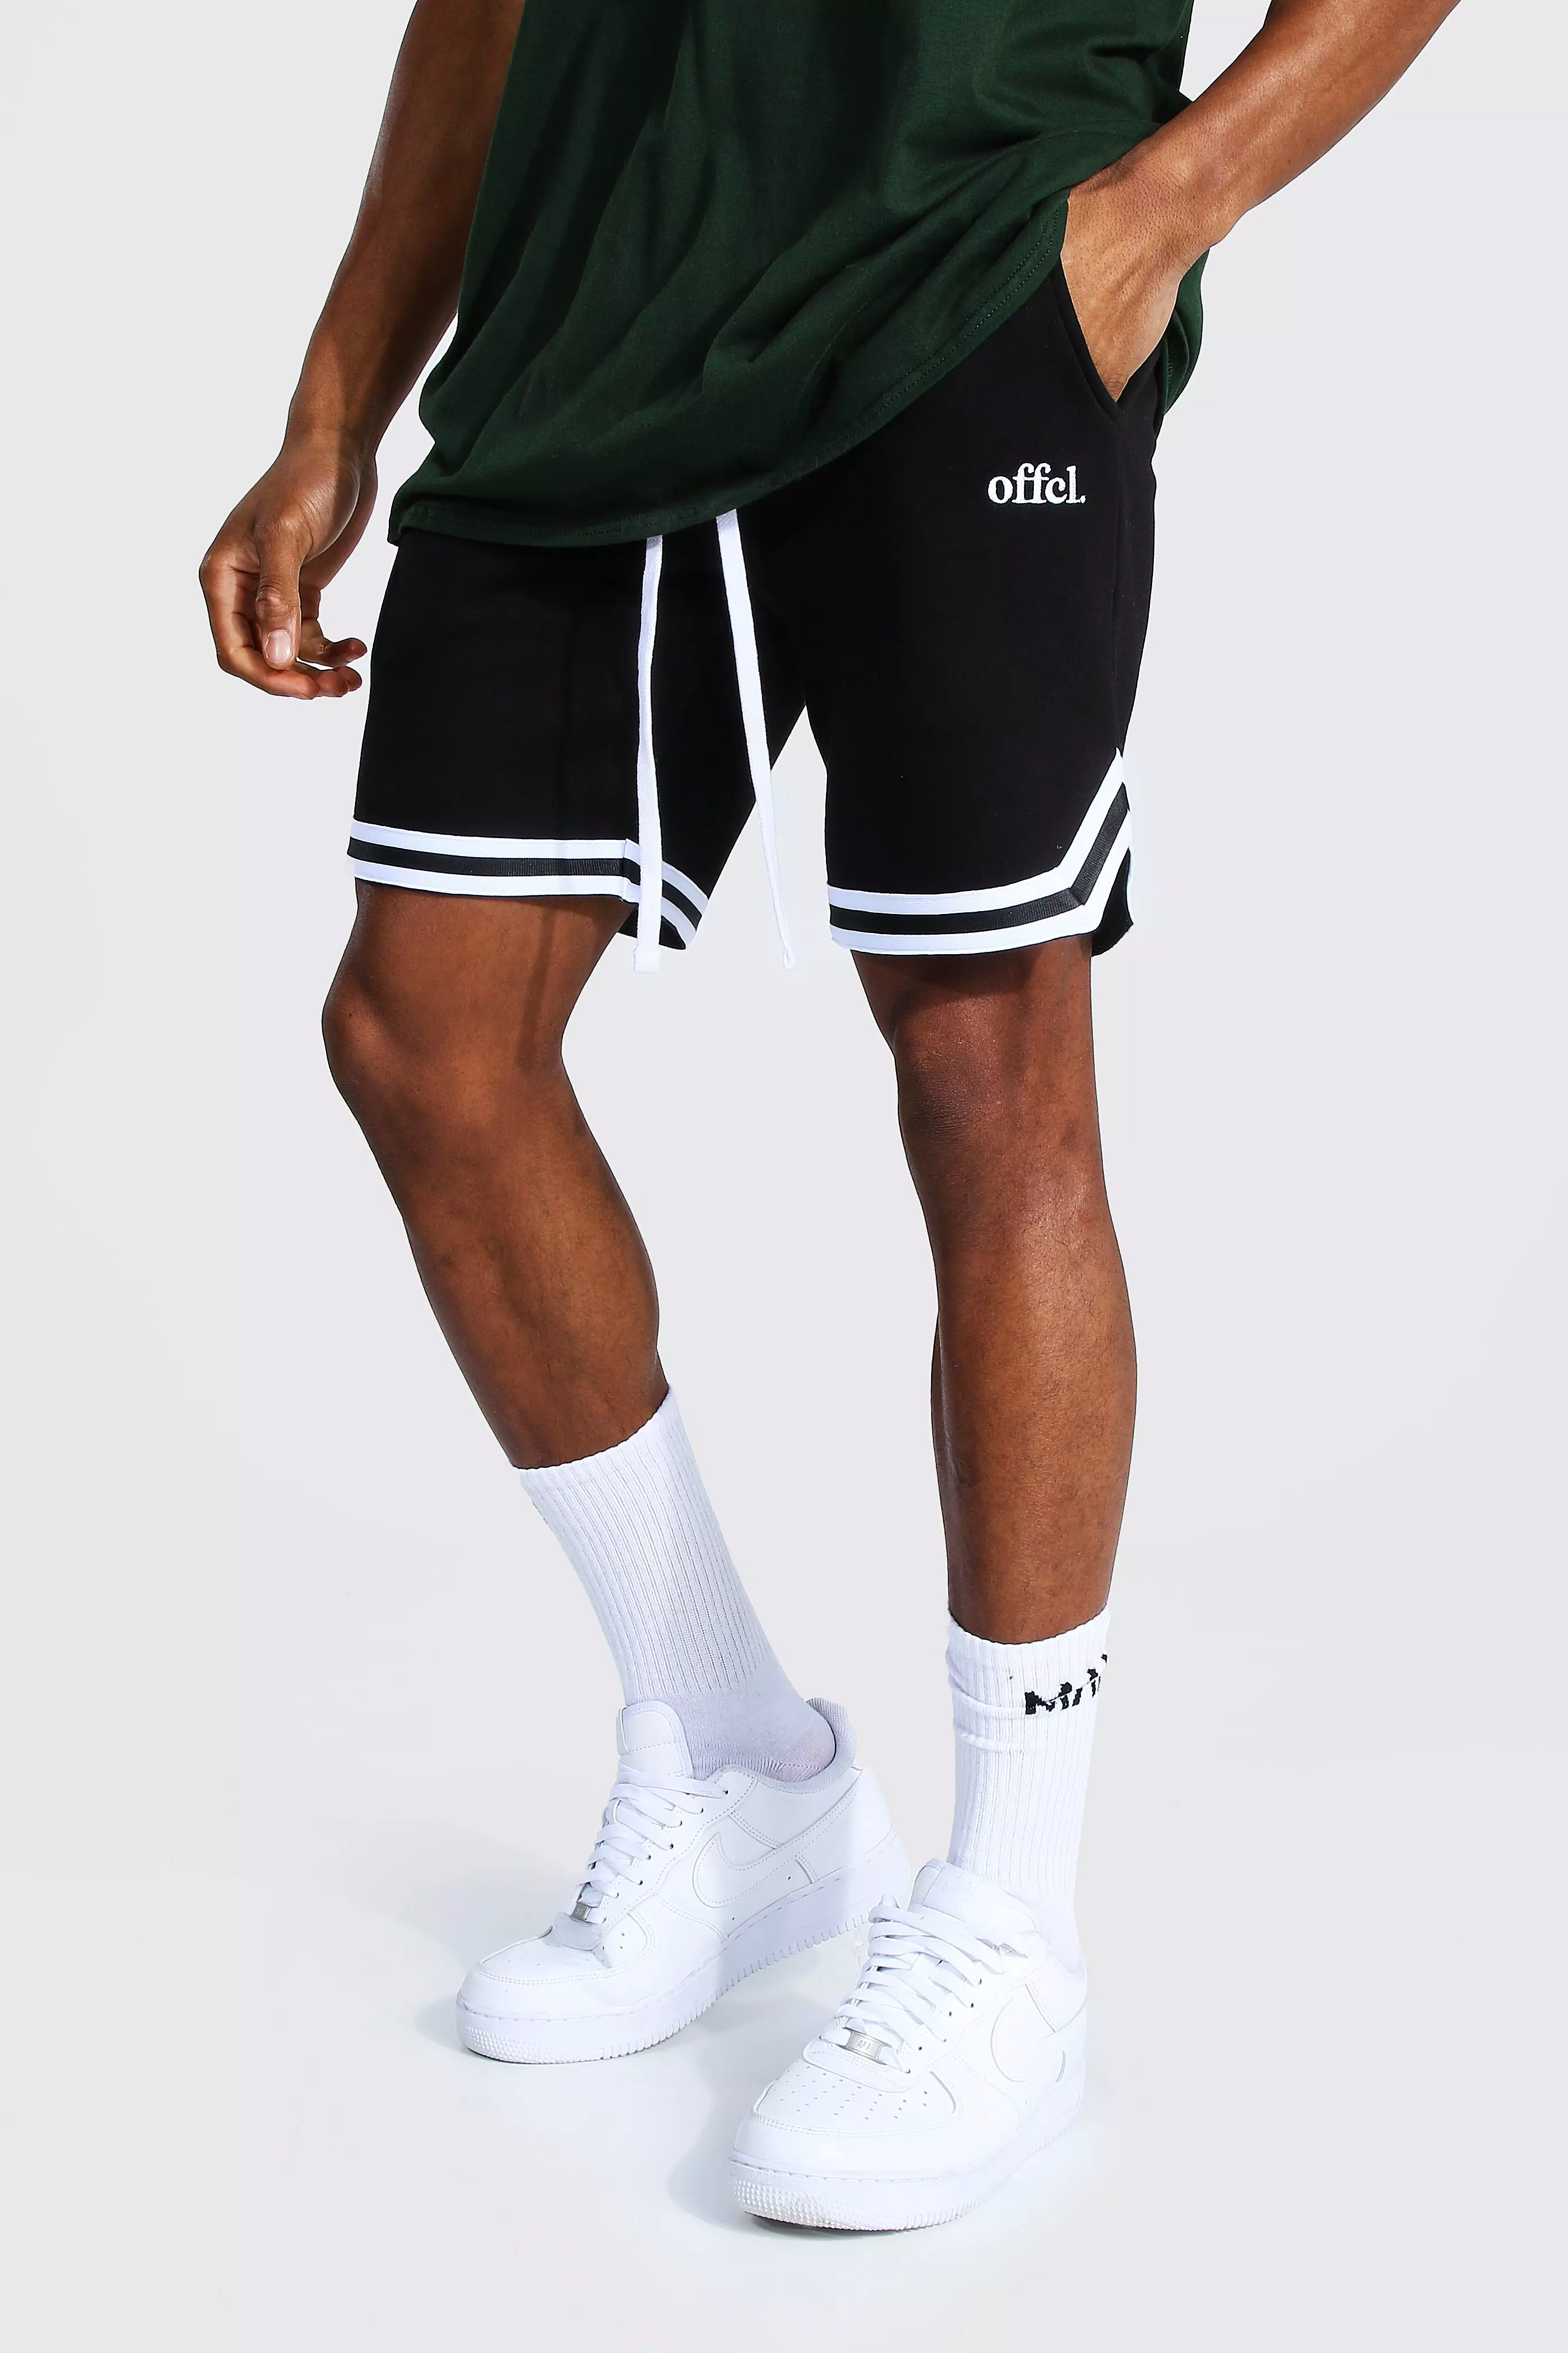 Offcl Basketball Jersey Shorts With Tape